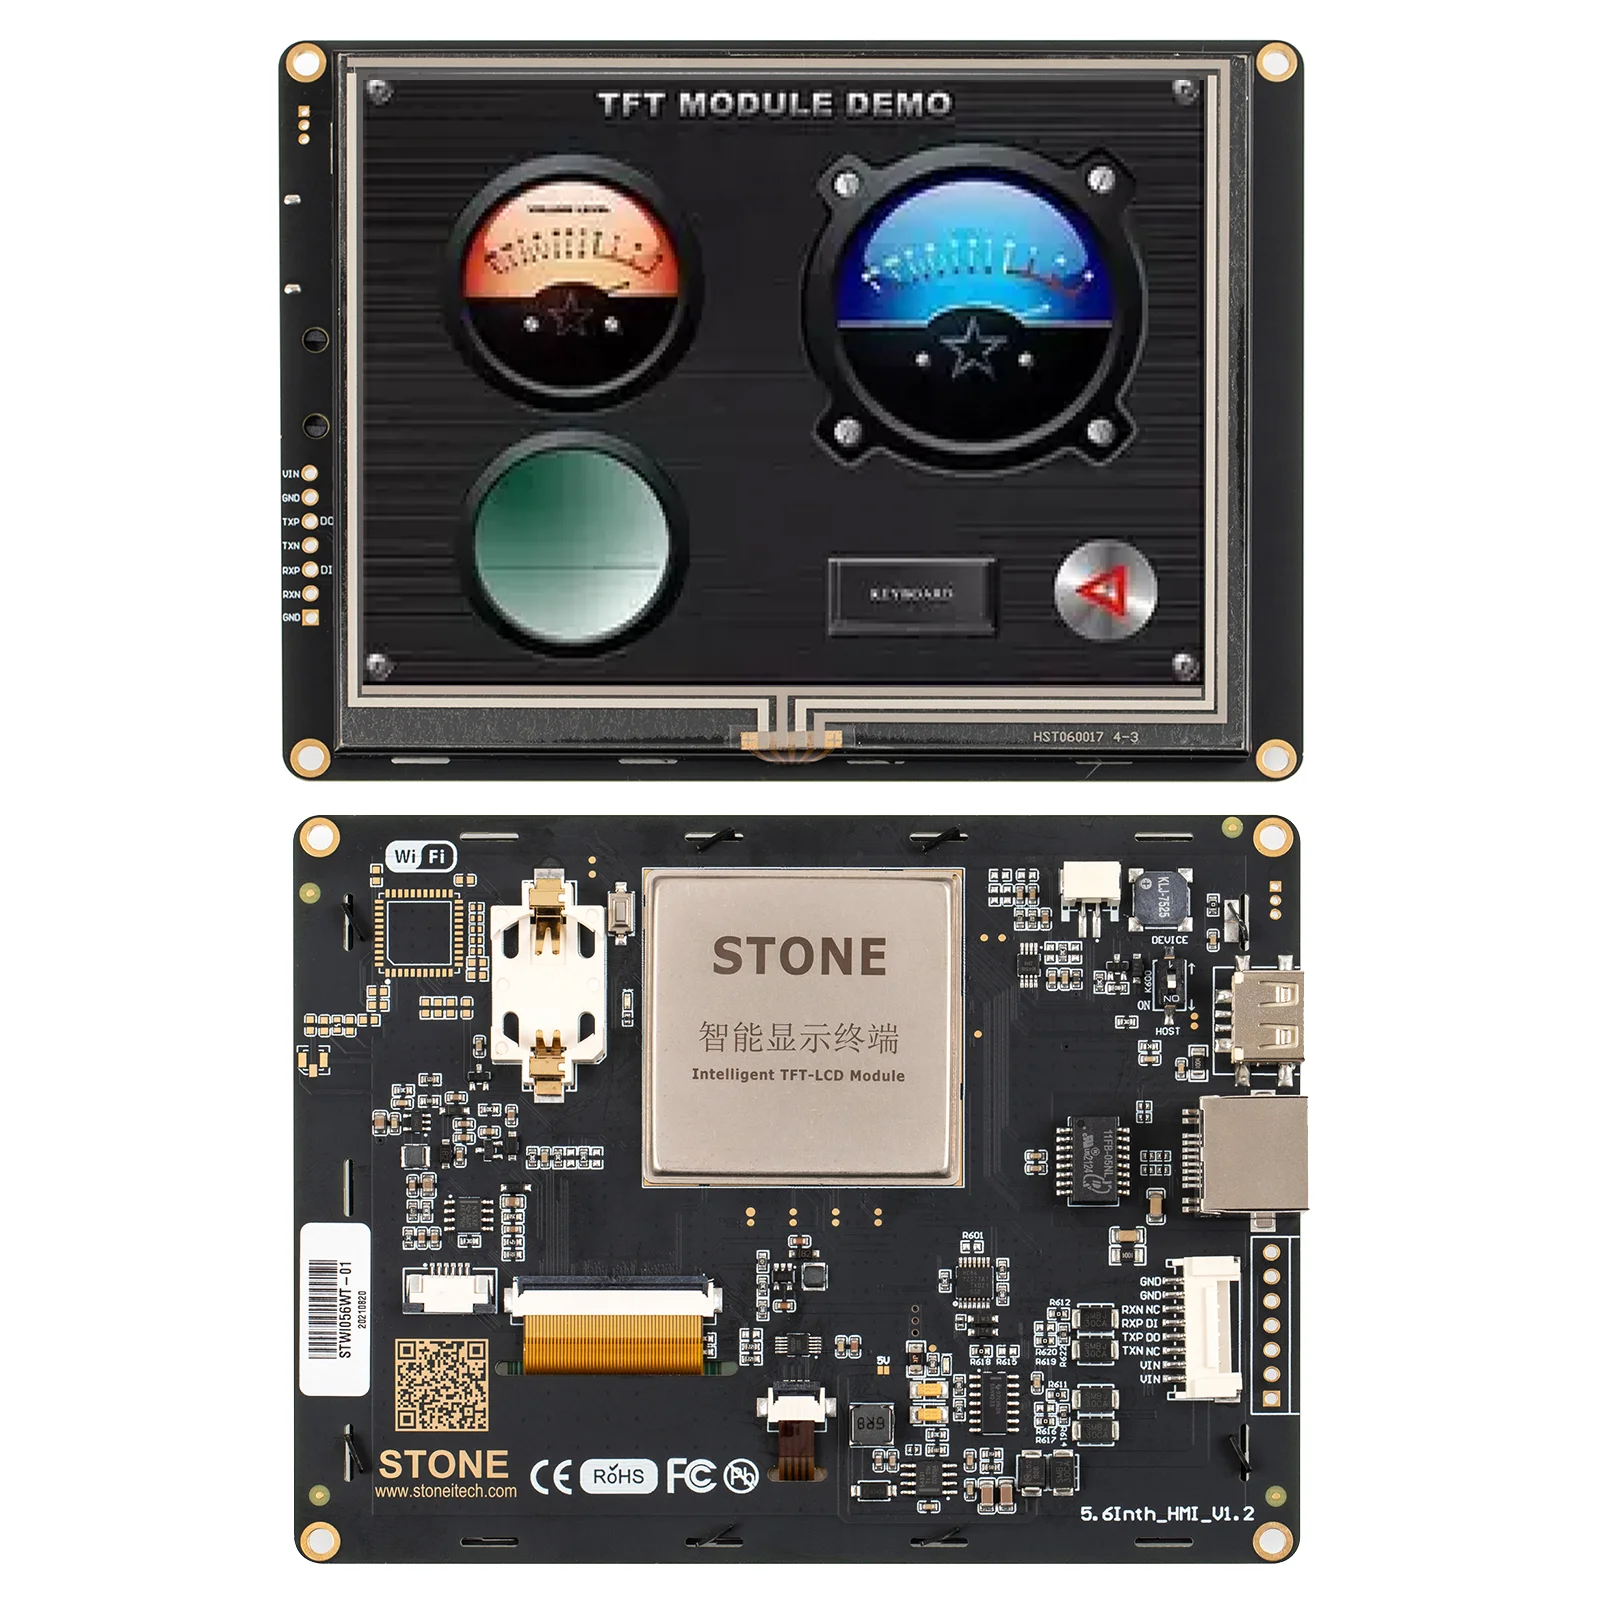 STONE I-Series HMI Graphic LCD Display Module with Program Touch Screen for Equipment Control Panel